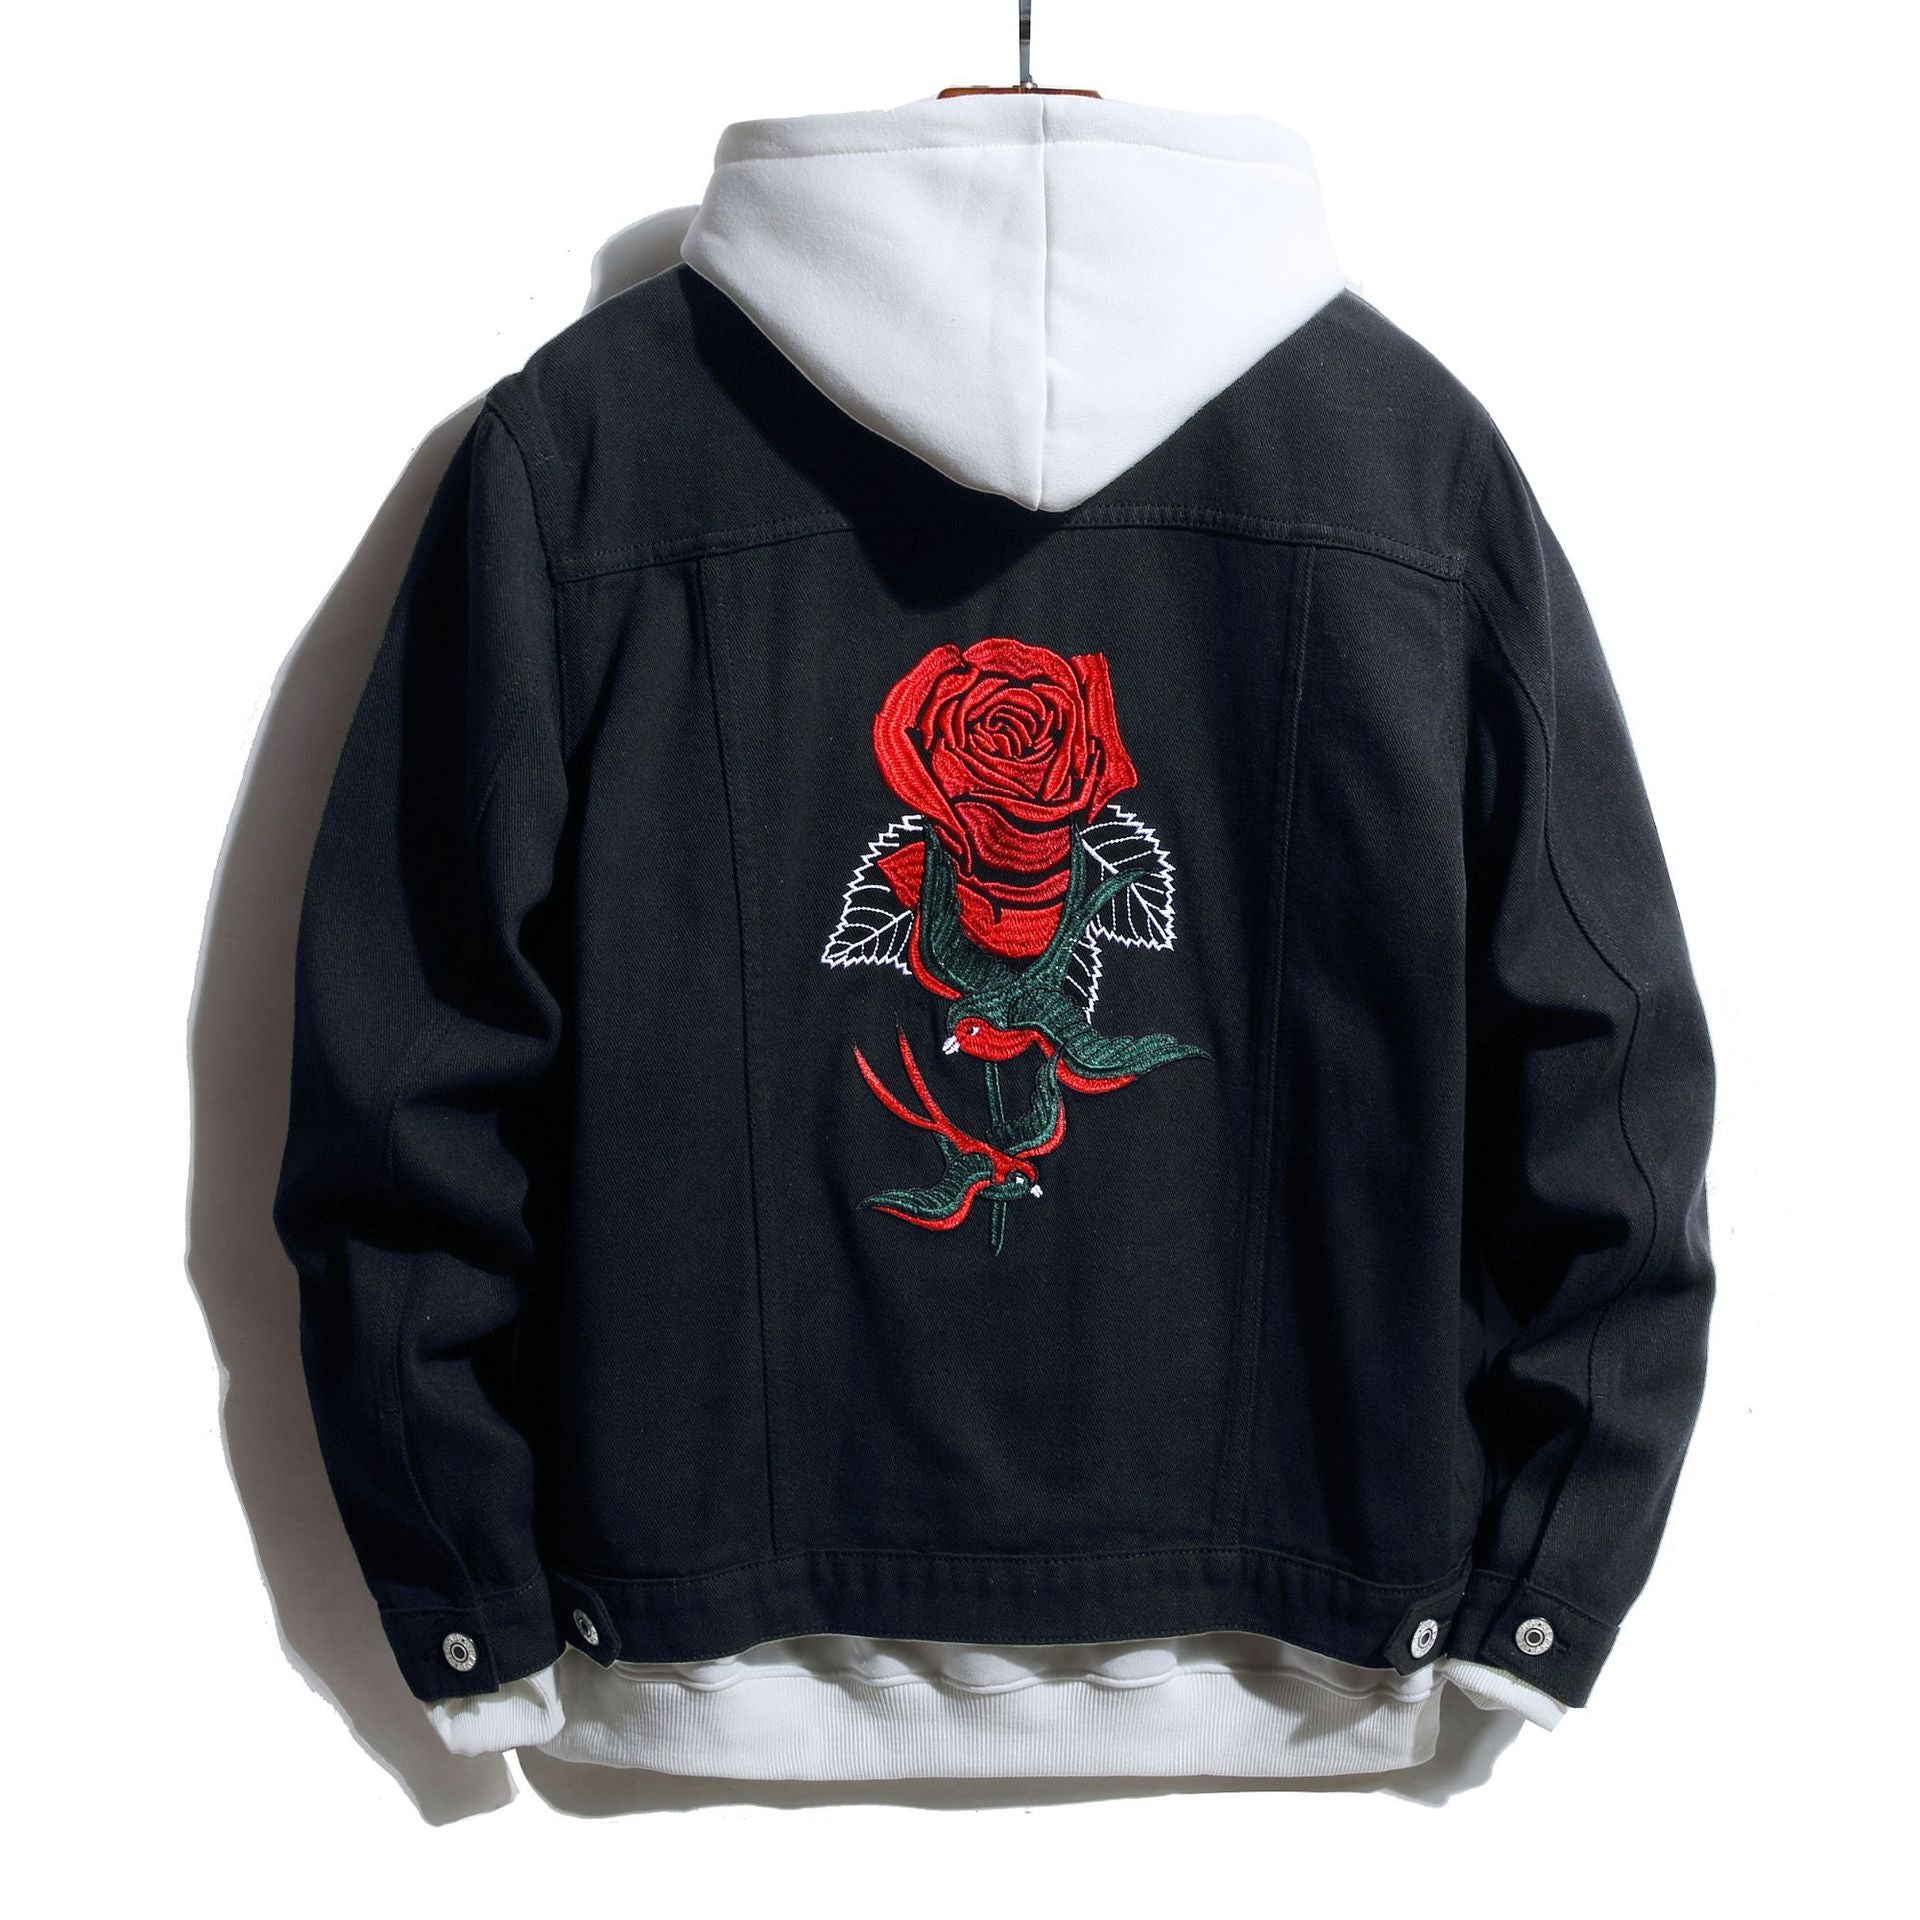 Black Denim Jacket with Rose Embroidery